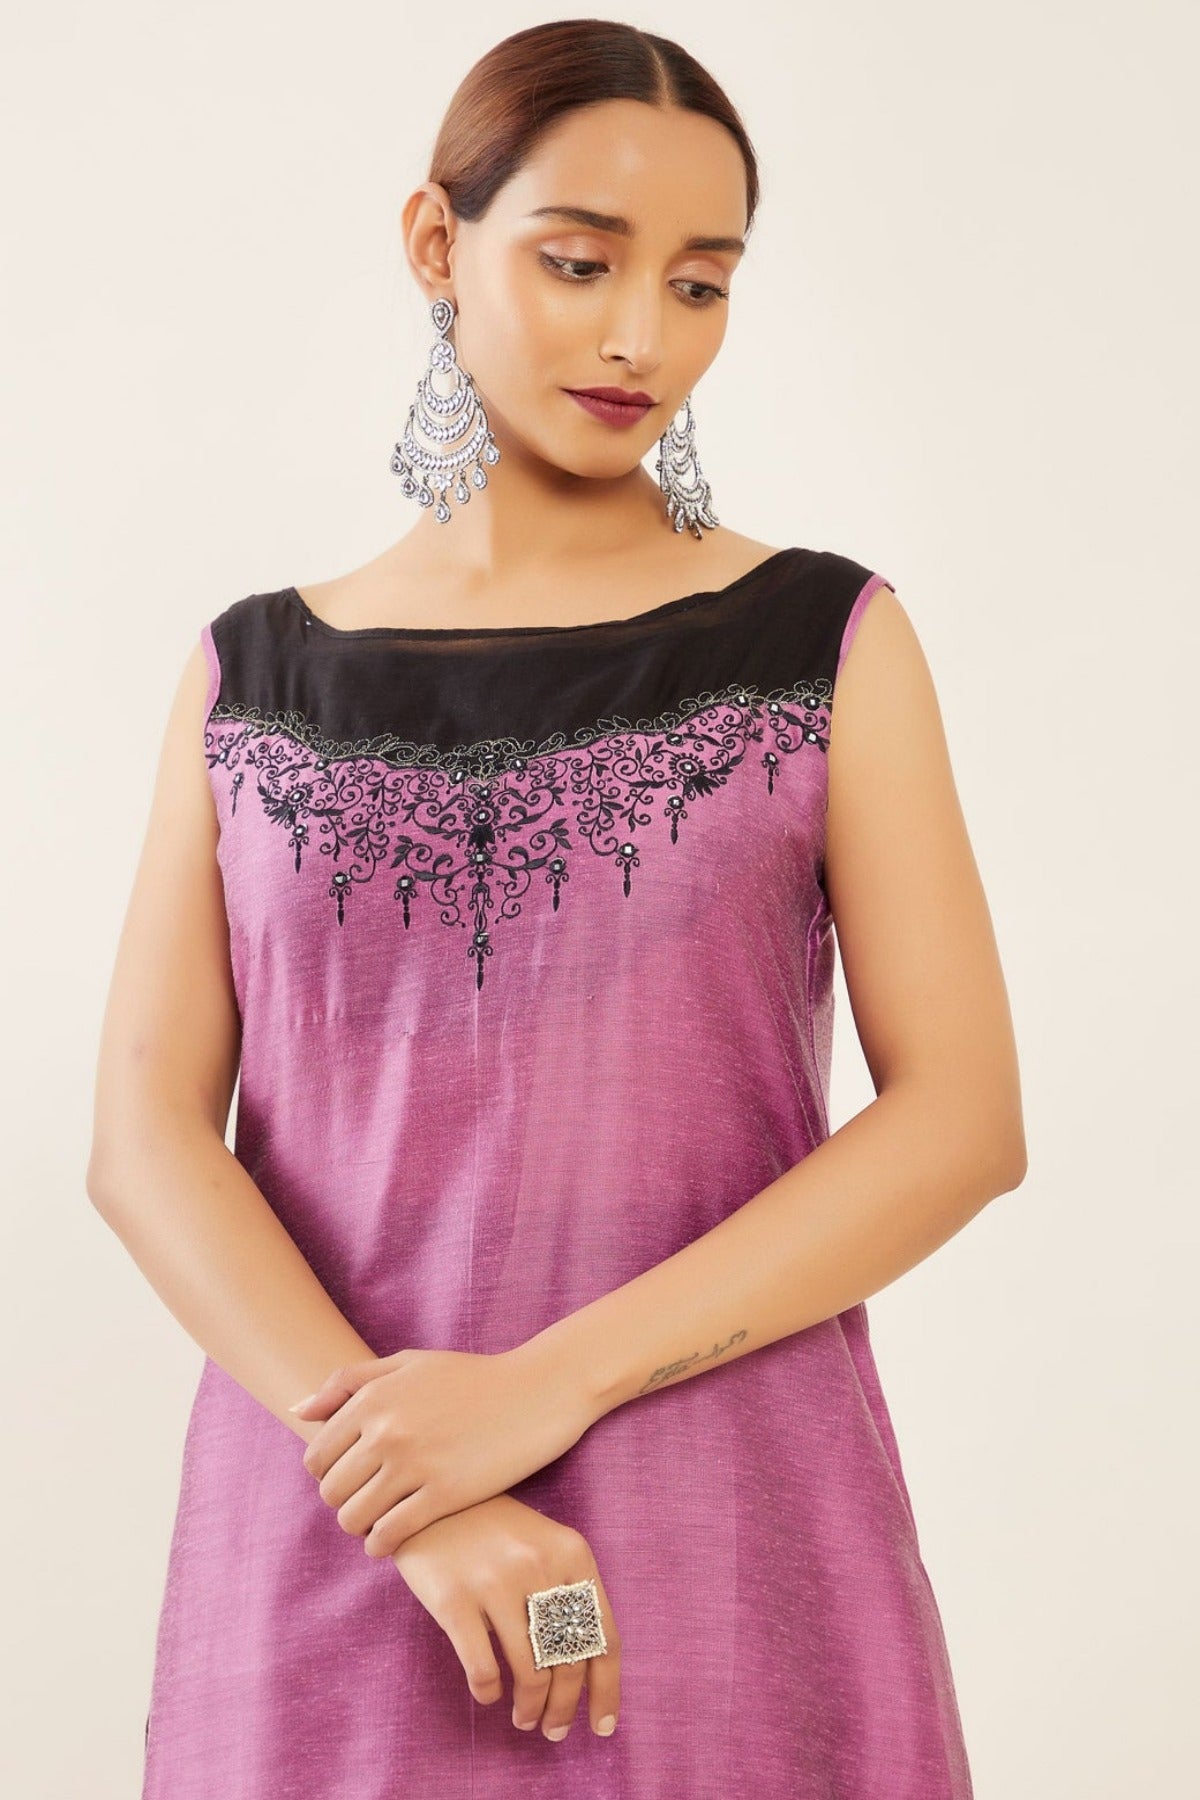 Contrast Double Layered Net with Vintage Floral Embroidered Sleeveless Kurta Purple